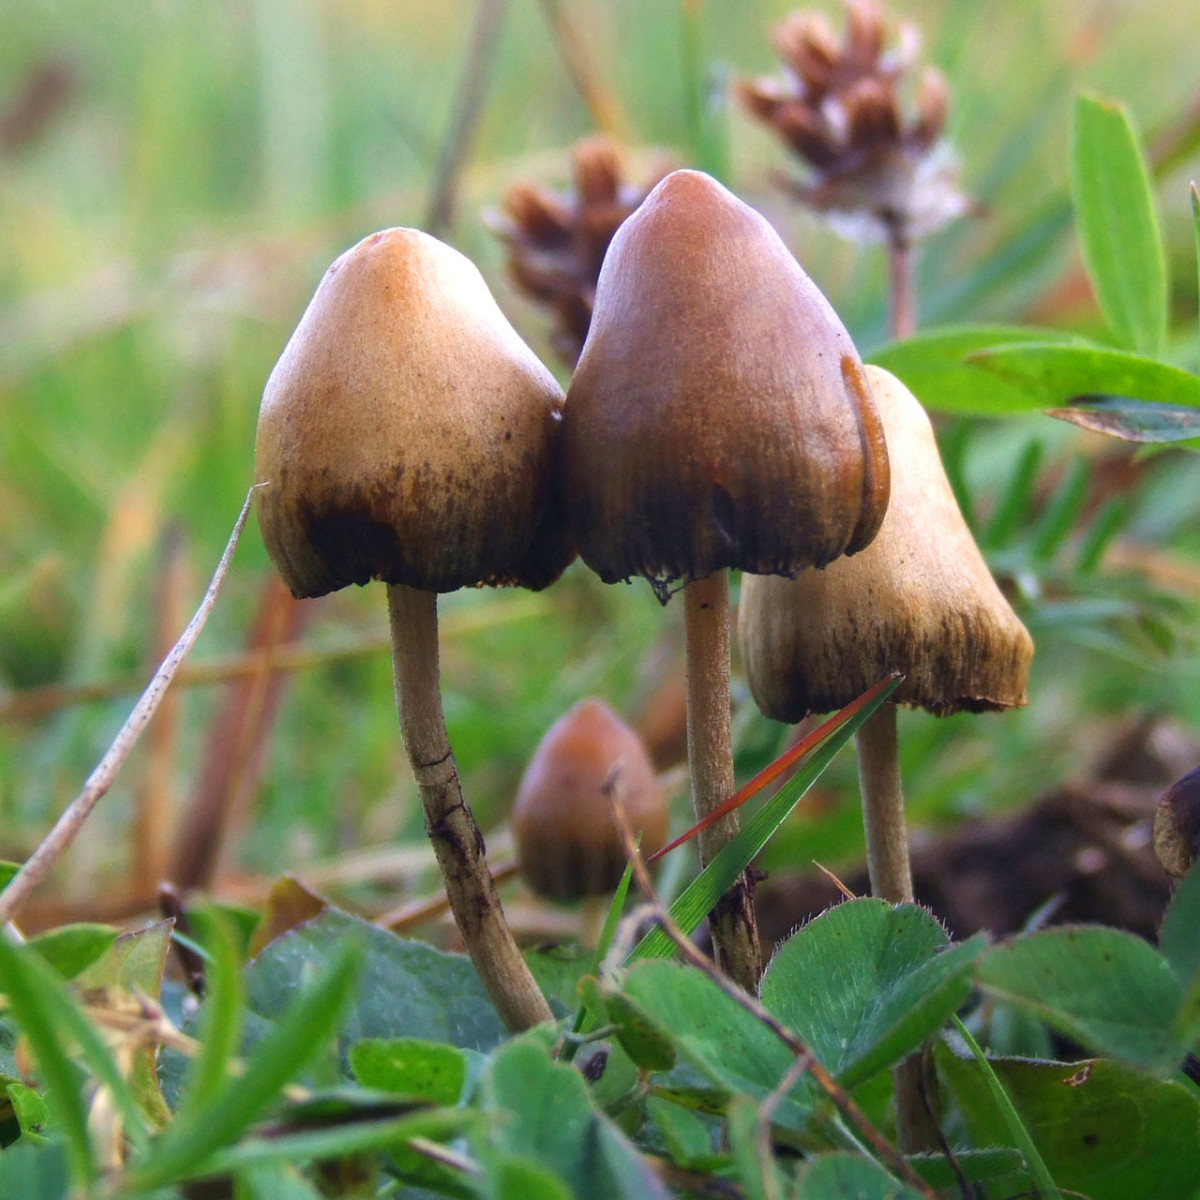 Psilocybin has proven to be a powerful treatment for psychiatric conditions such as depression and OCD.